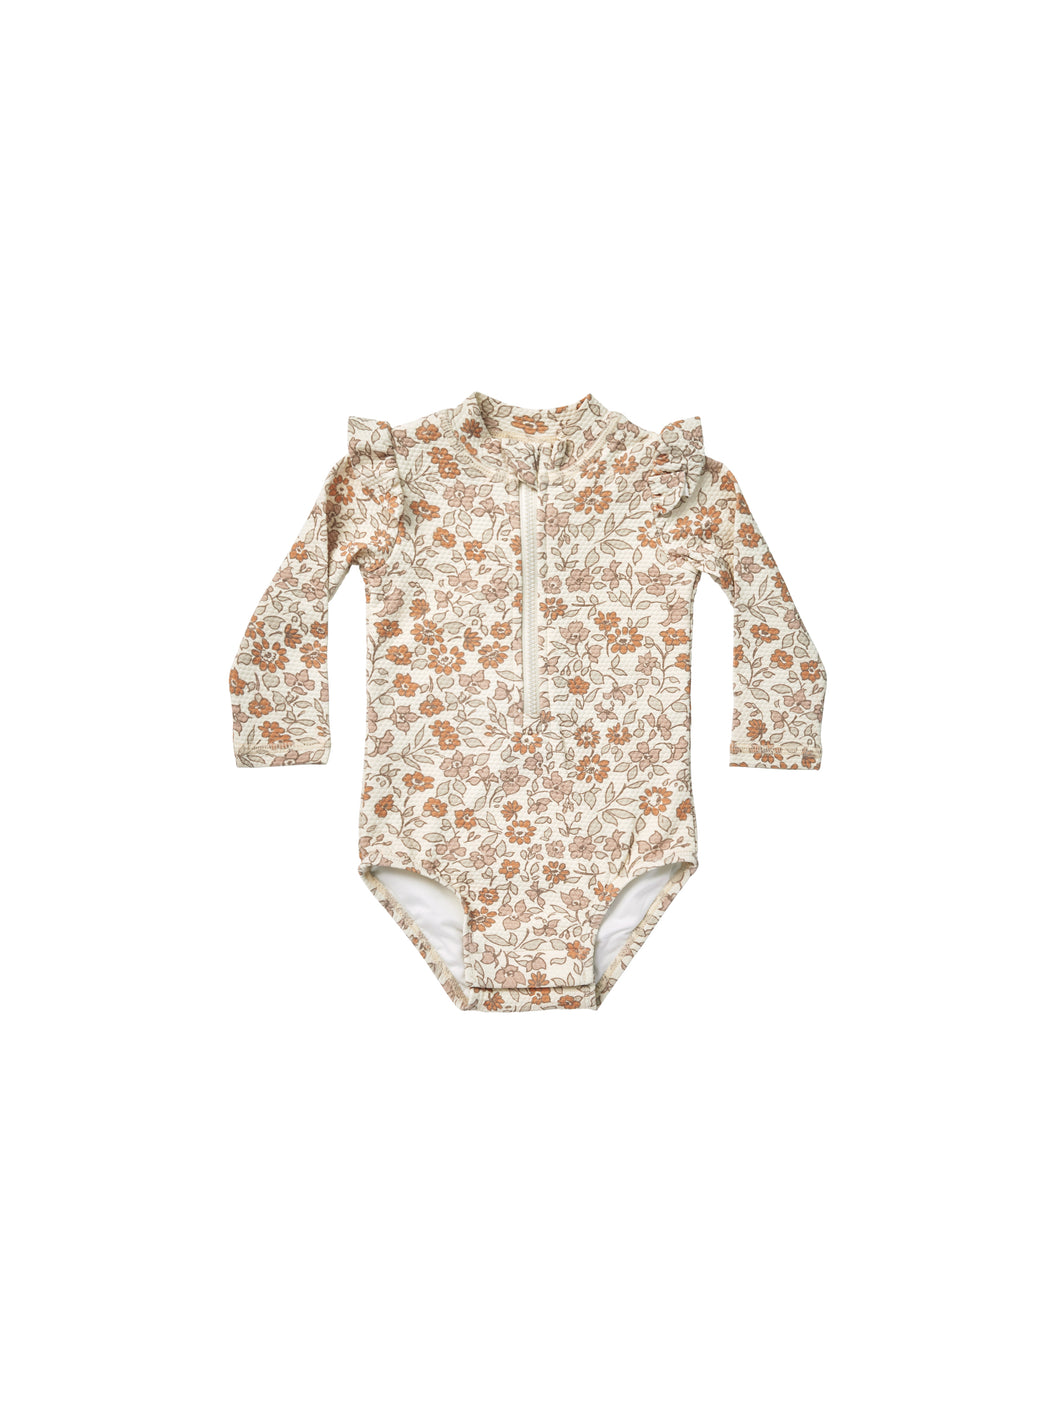 Beige coloured baby one piece rash guard with zipper on the front and ruffles on the shoulders. This rash-guard is featuring a floral print.